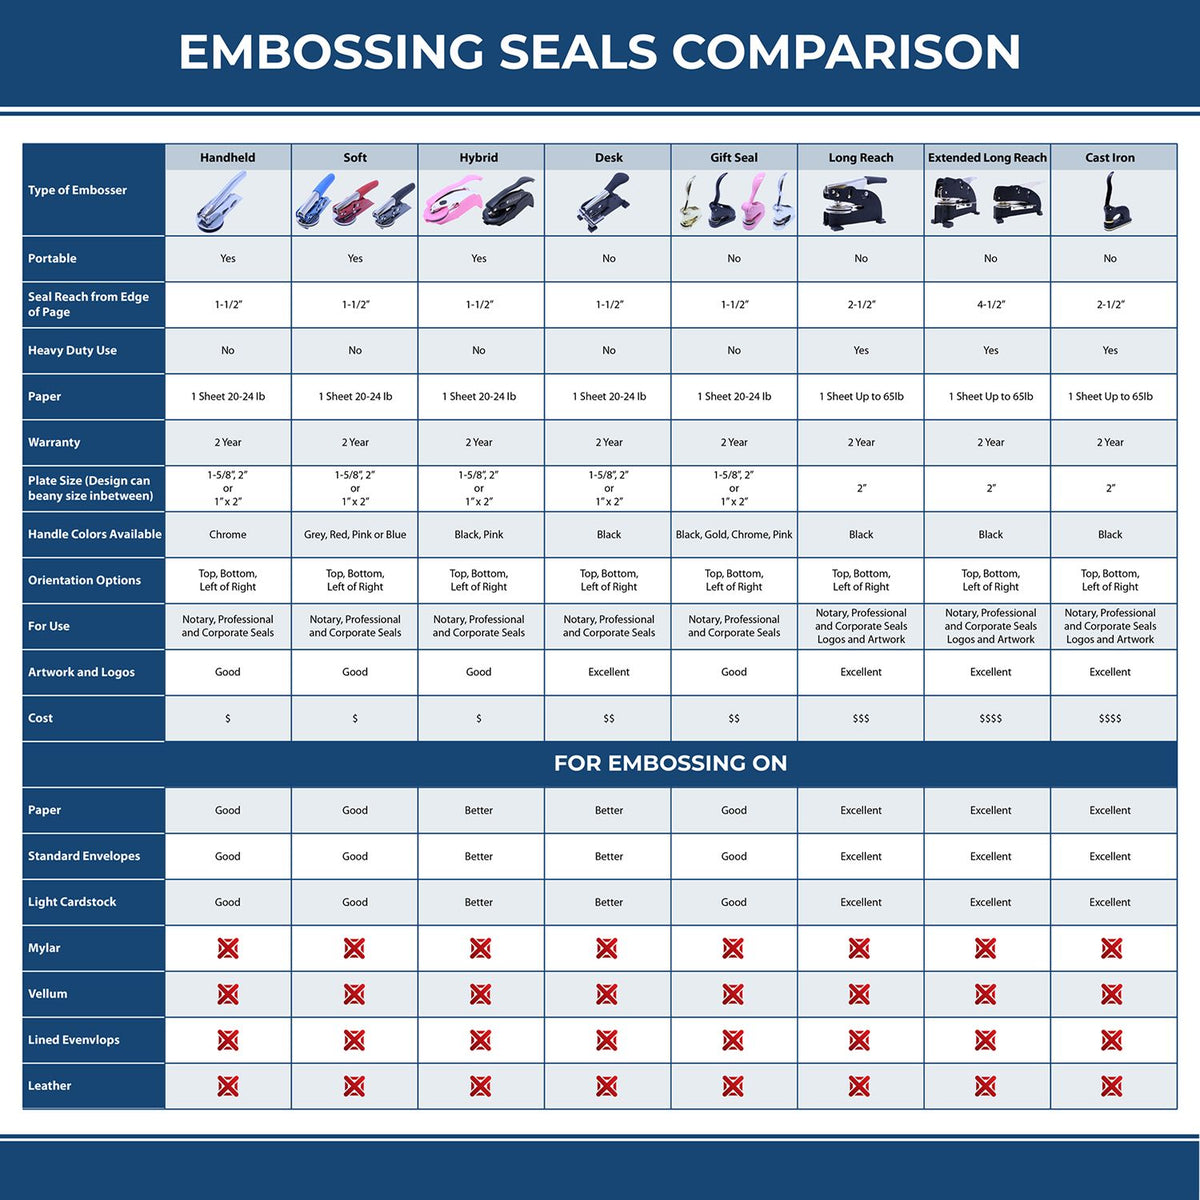 A comparison chart for the different types of mount models available for the Soft Pocket Utah Landscape Architect Embosser.